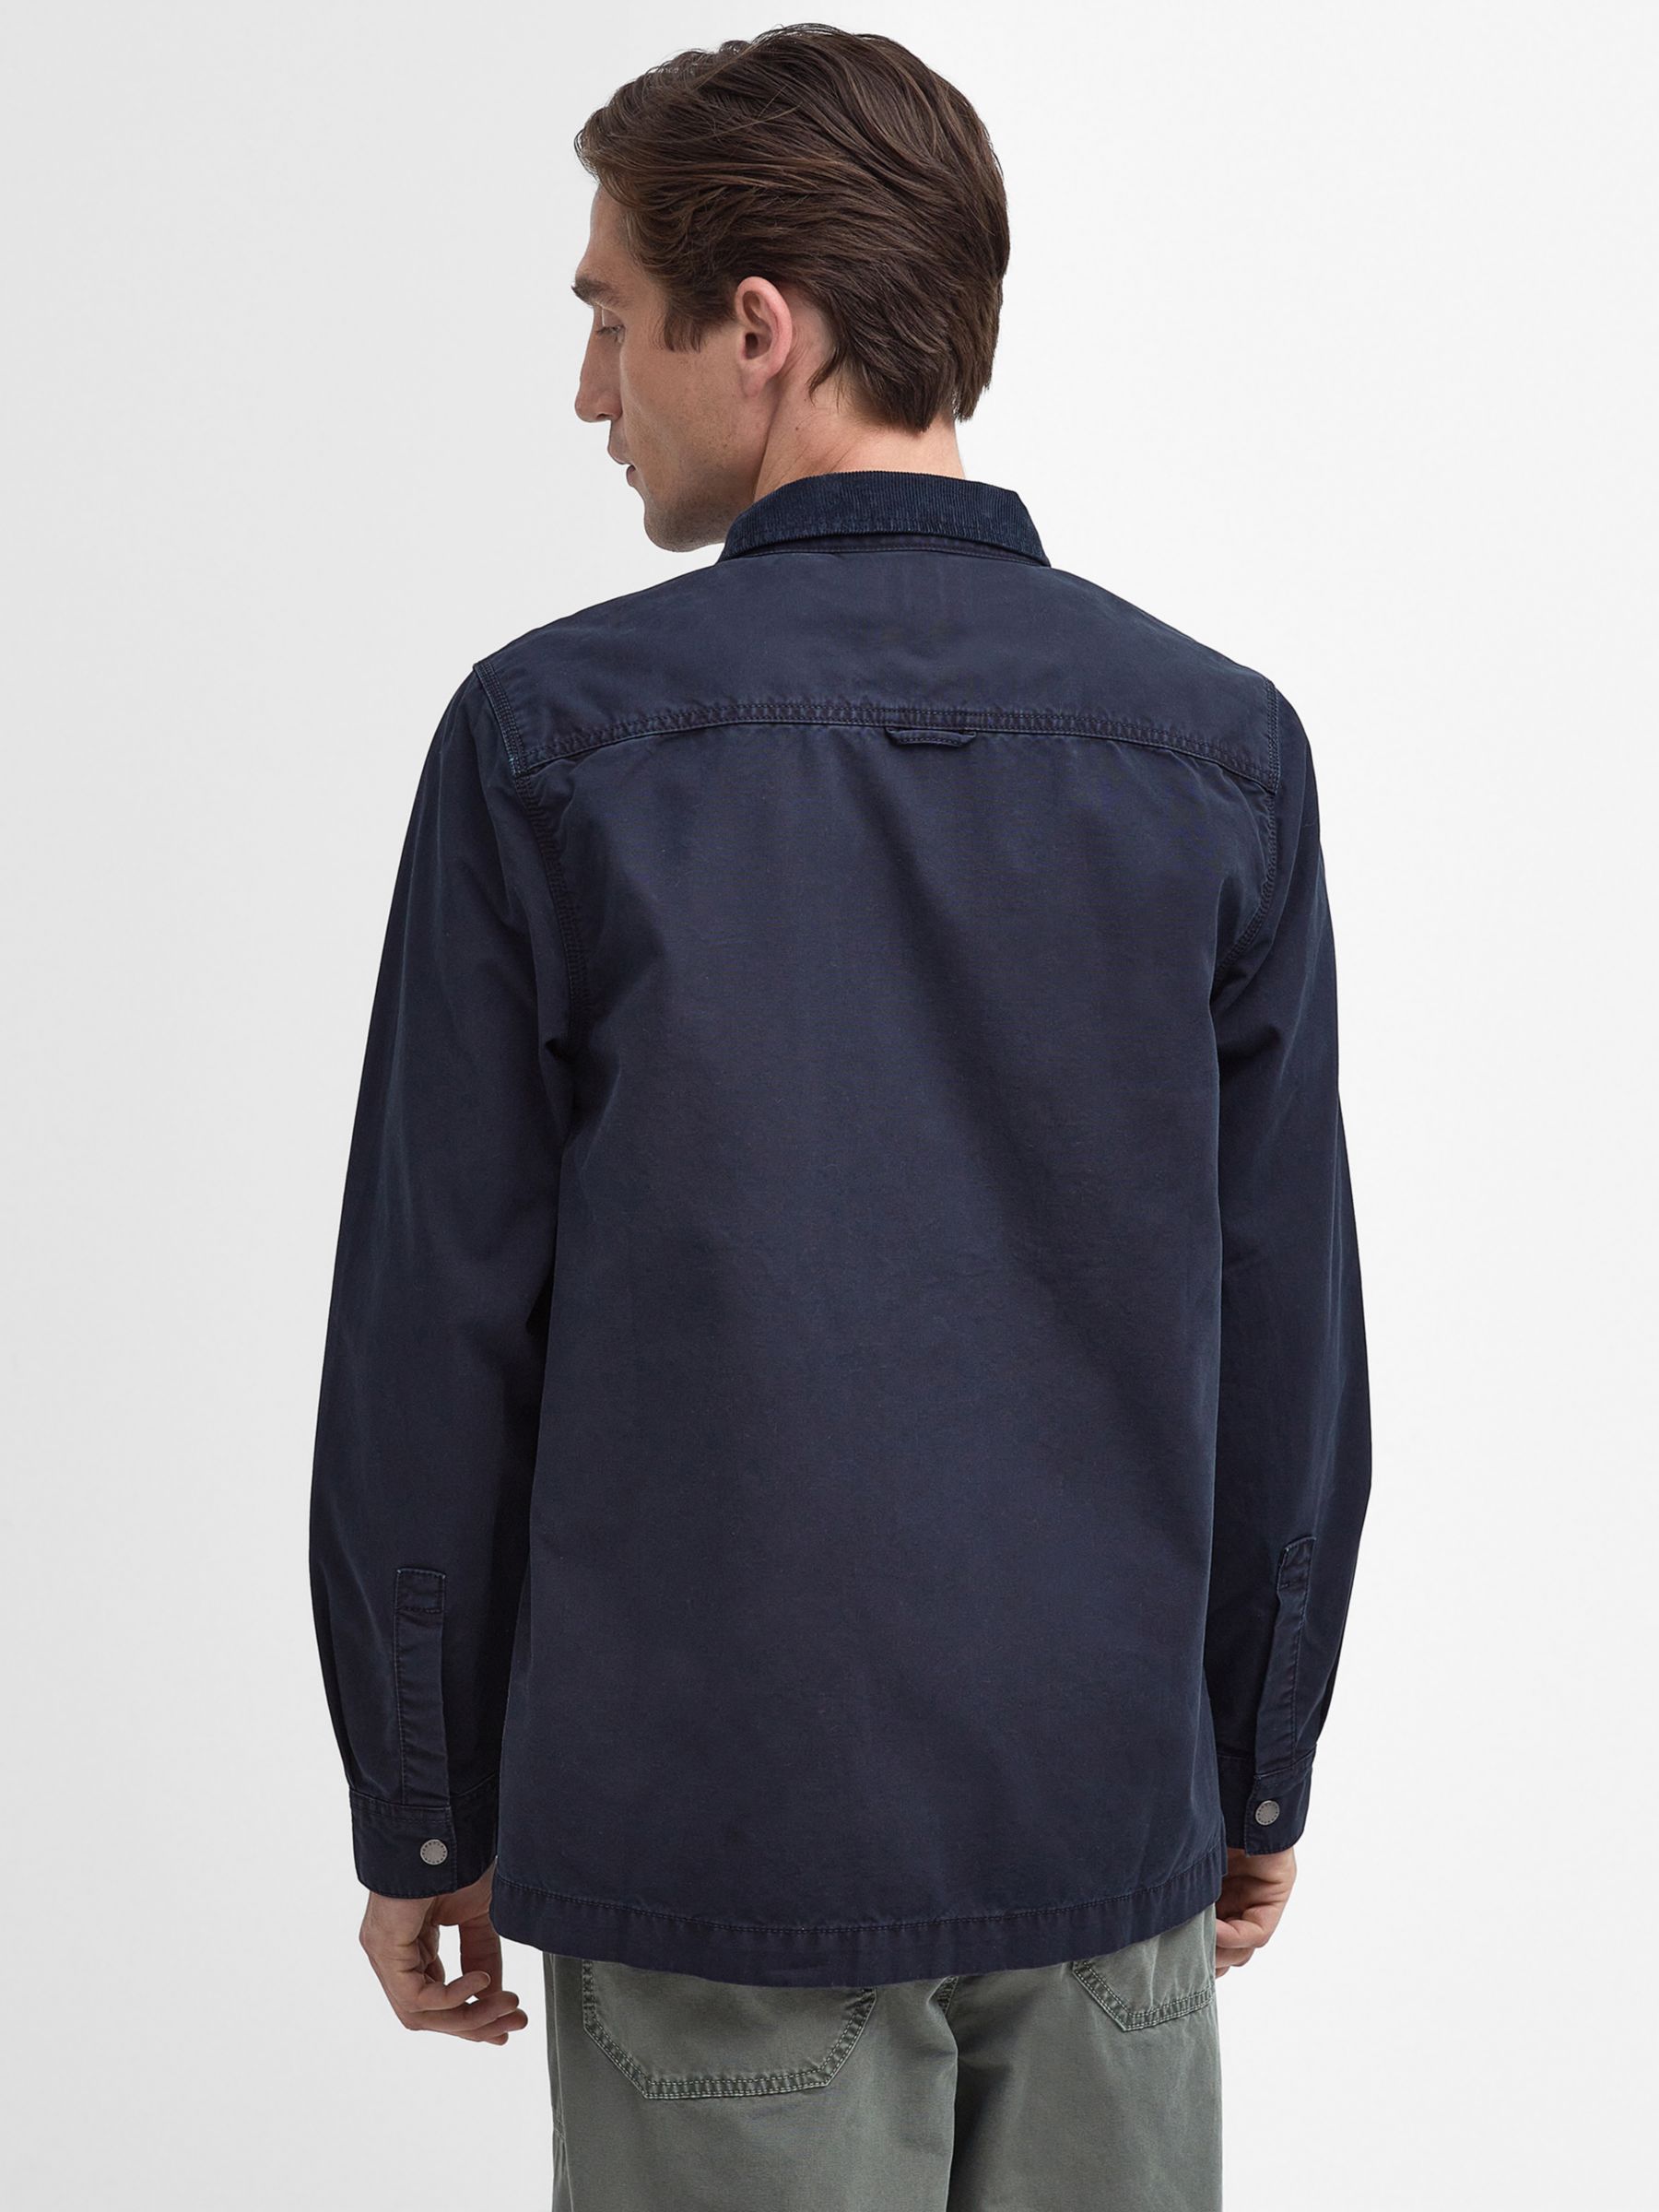 Barbour Grindle Cotton Overshirt, Navy, S